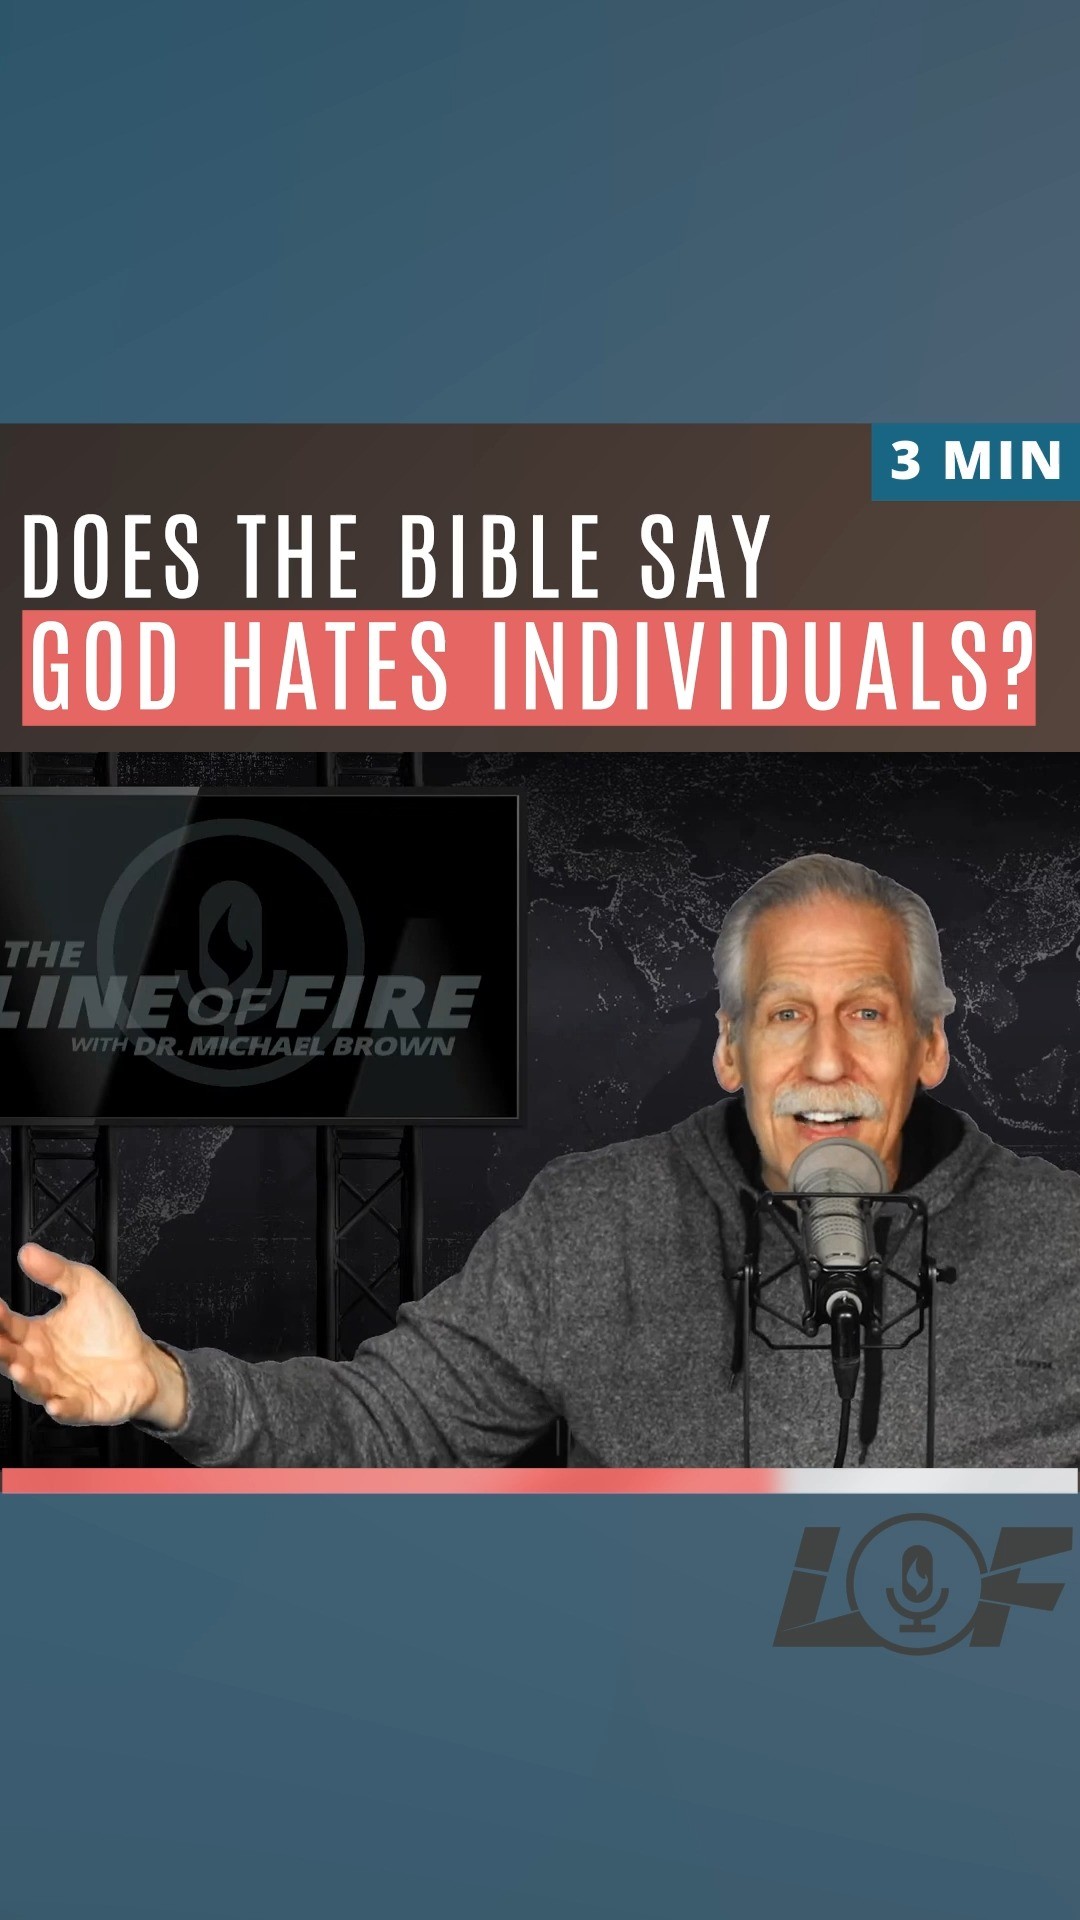 Does The Bible Say God Hates Individuals?